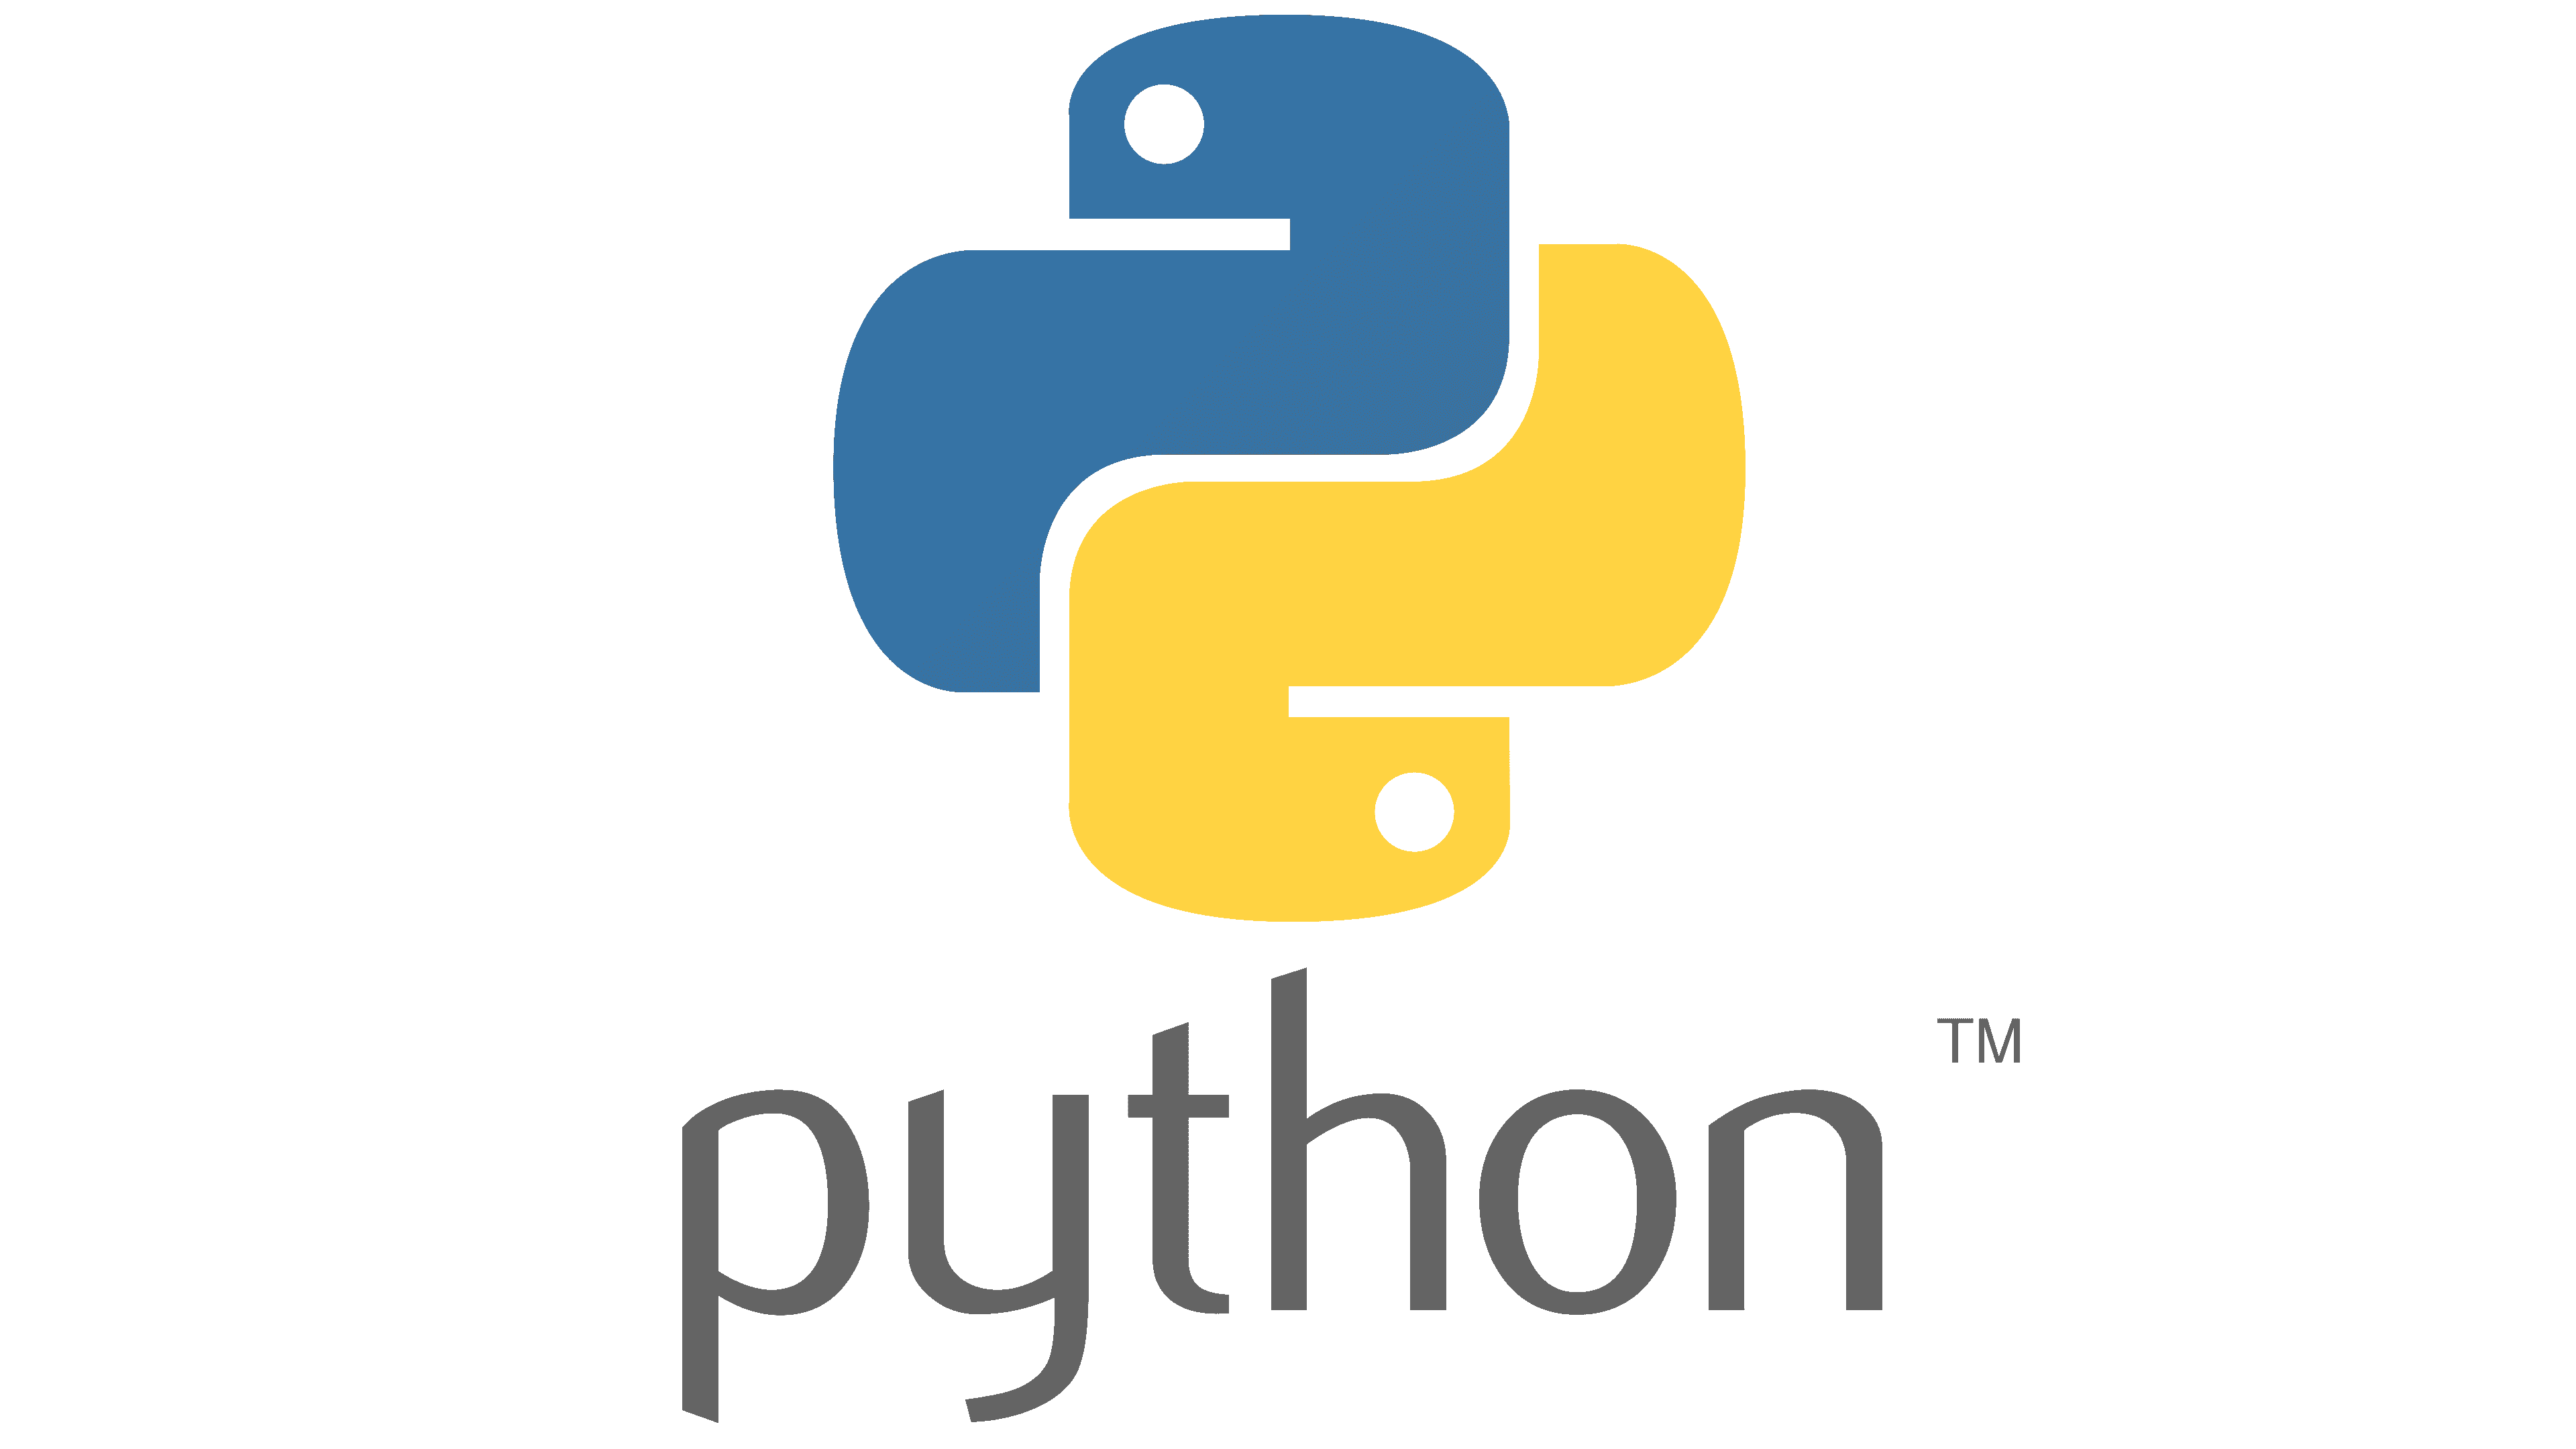 Performing Linear Regression in Python with scikit-learn